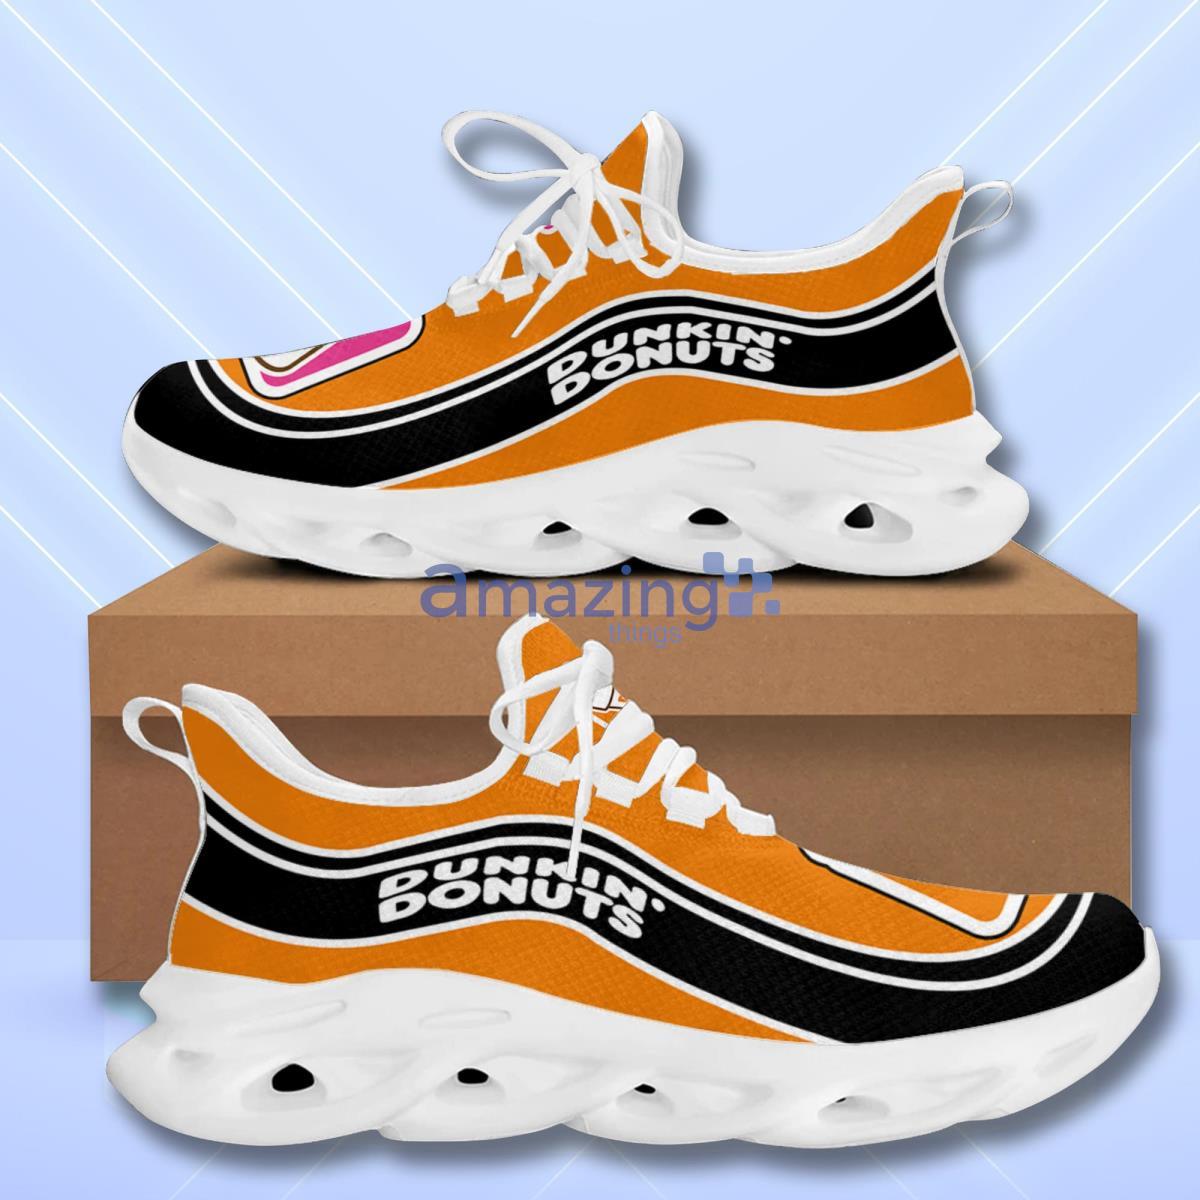 Dunkin’ Donuts Max Soul Shoes Hot Trending Best Gift For Men Women Product Photo 2